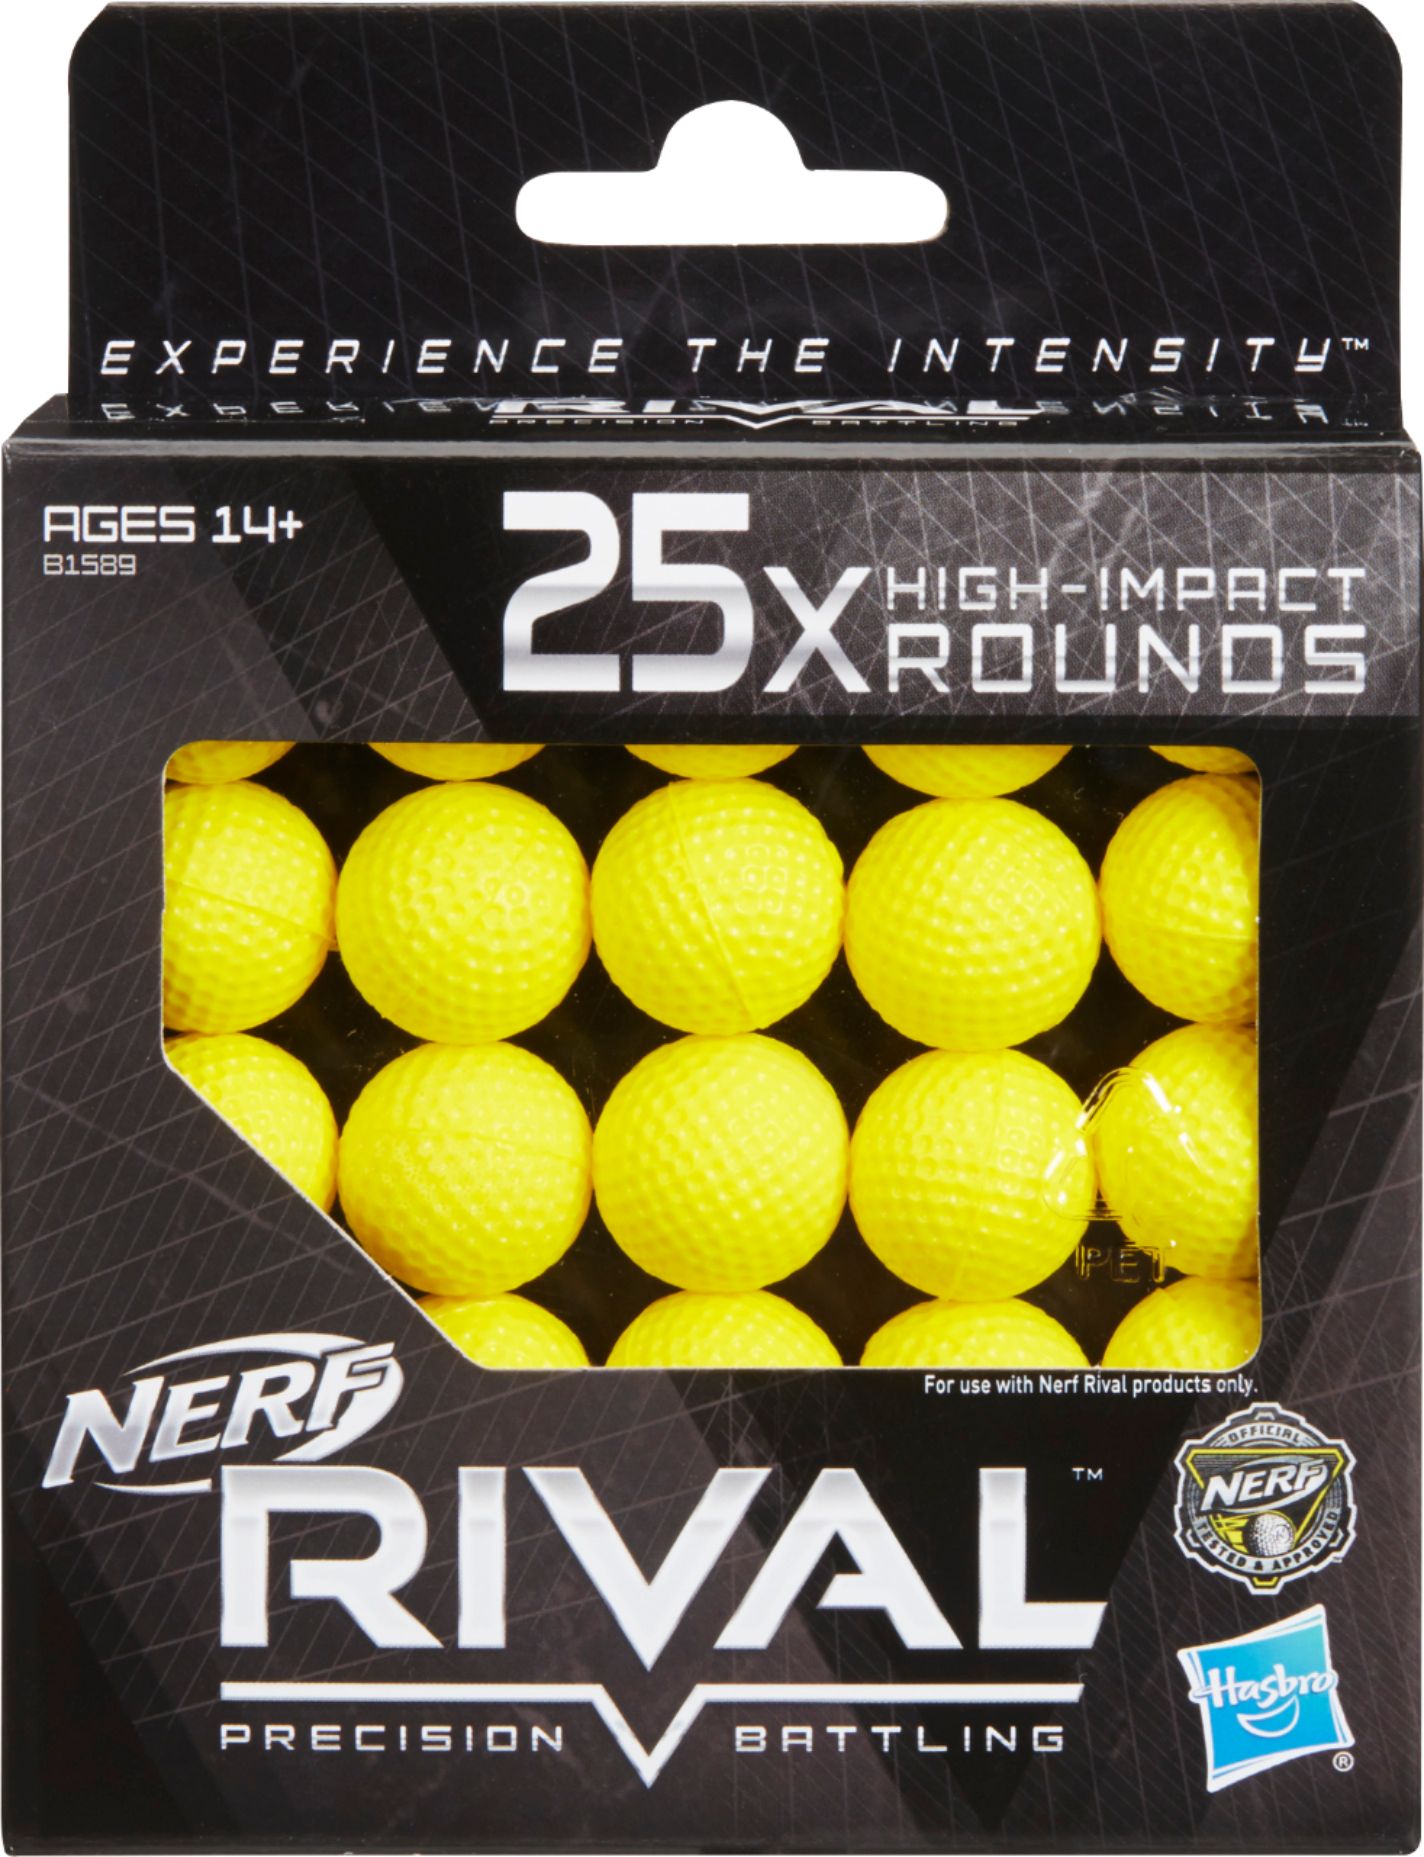 NERF Rival Overwatch Balls 30x High Impact Rounds Refill Pack NEW Best Price! 